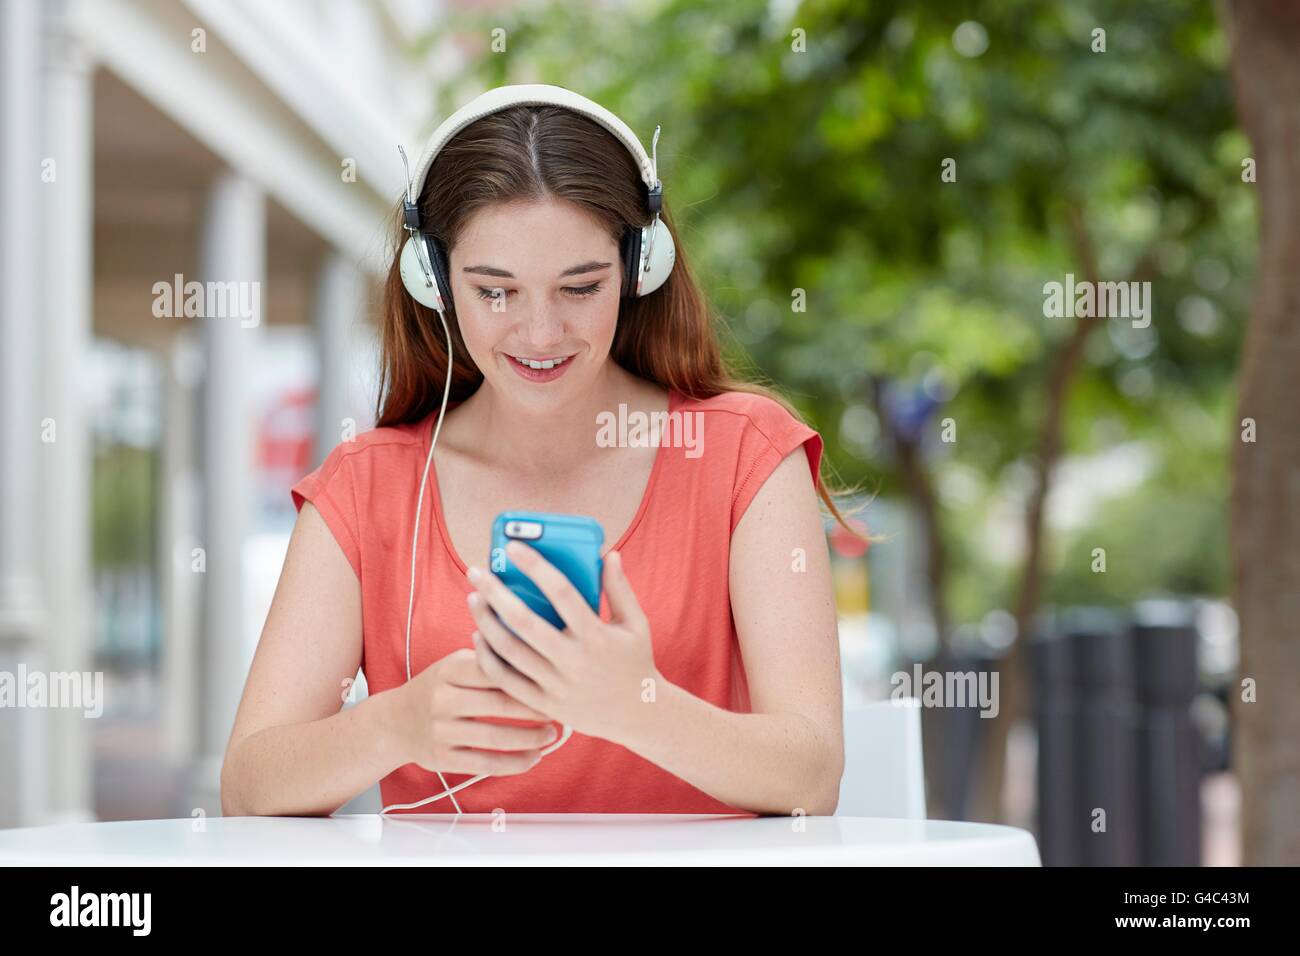 MODEL RELEASED. Young woman wearing headphones listening to music on smartphone. Stock Photo